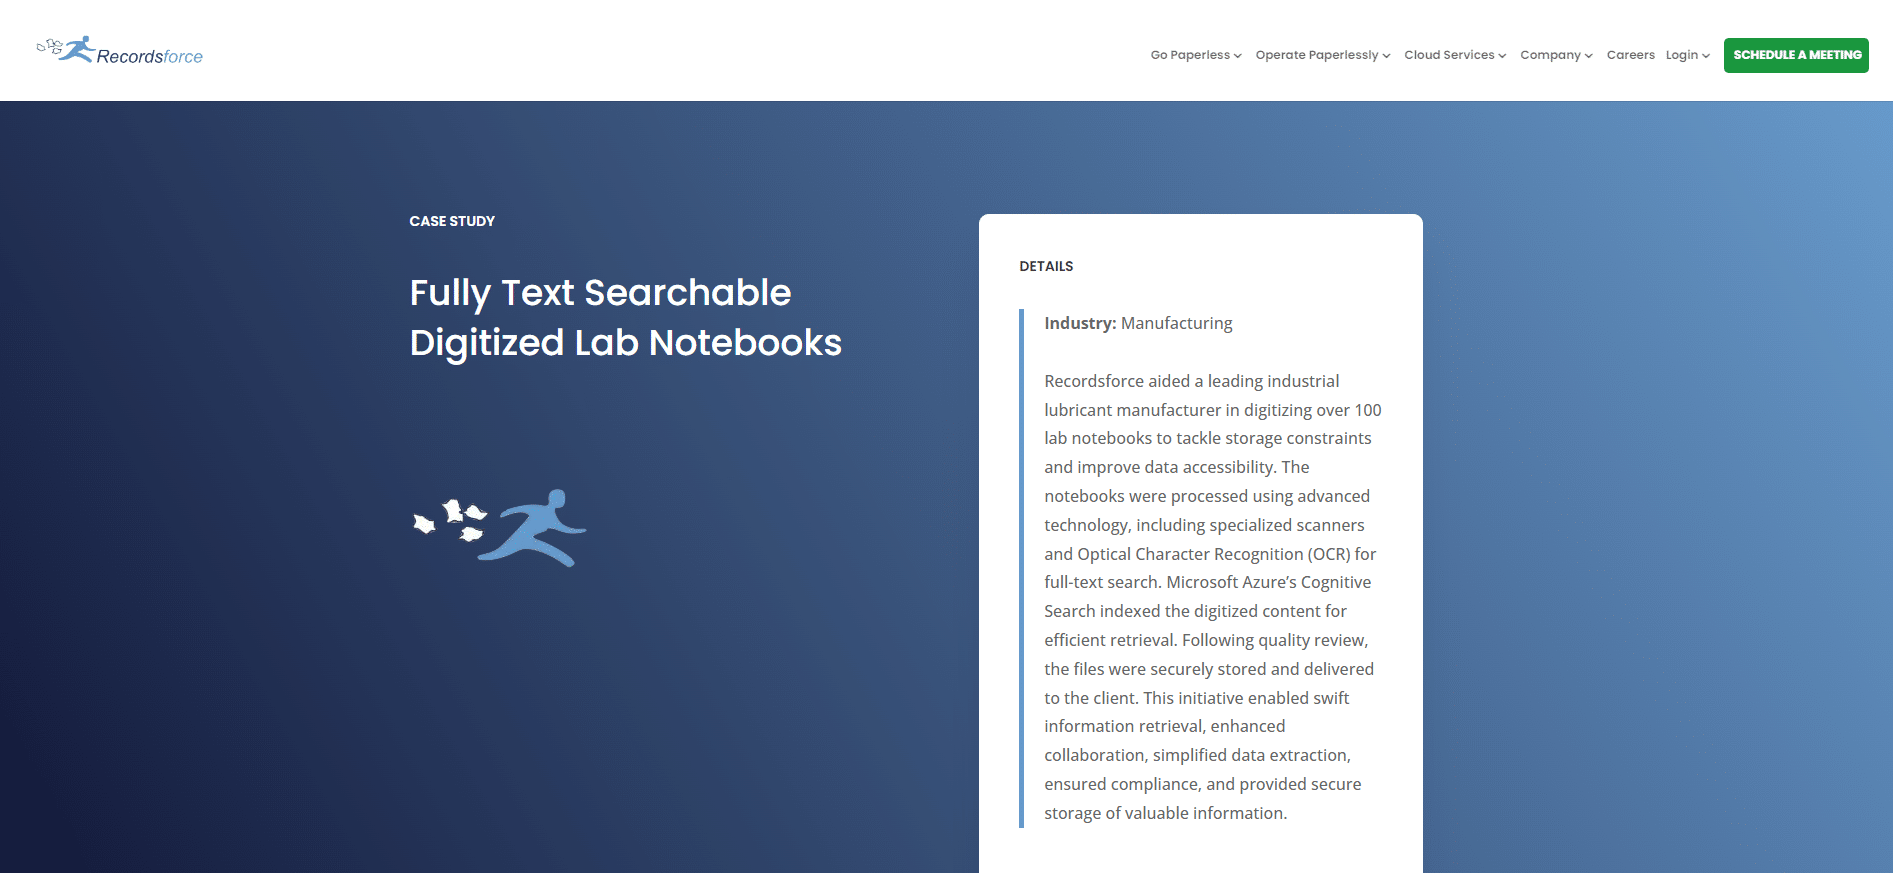 full text searchable digitized lab notebook case study